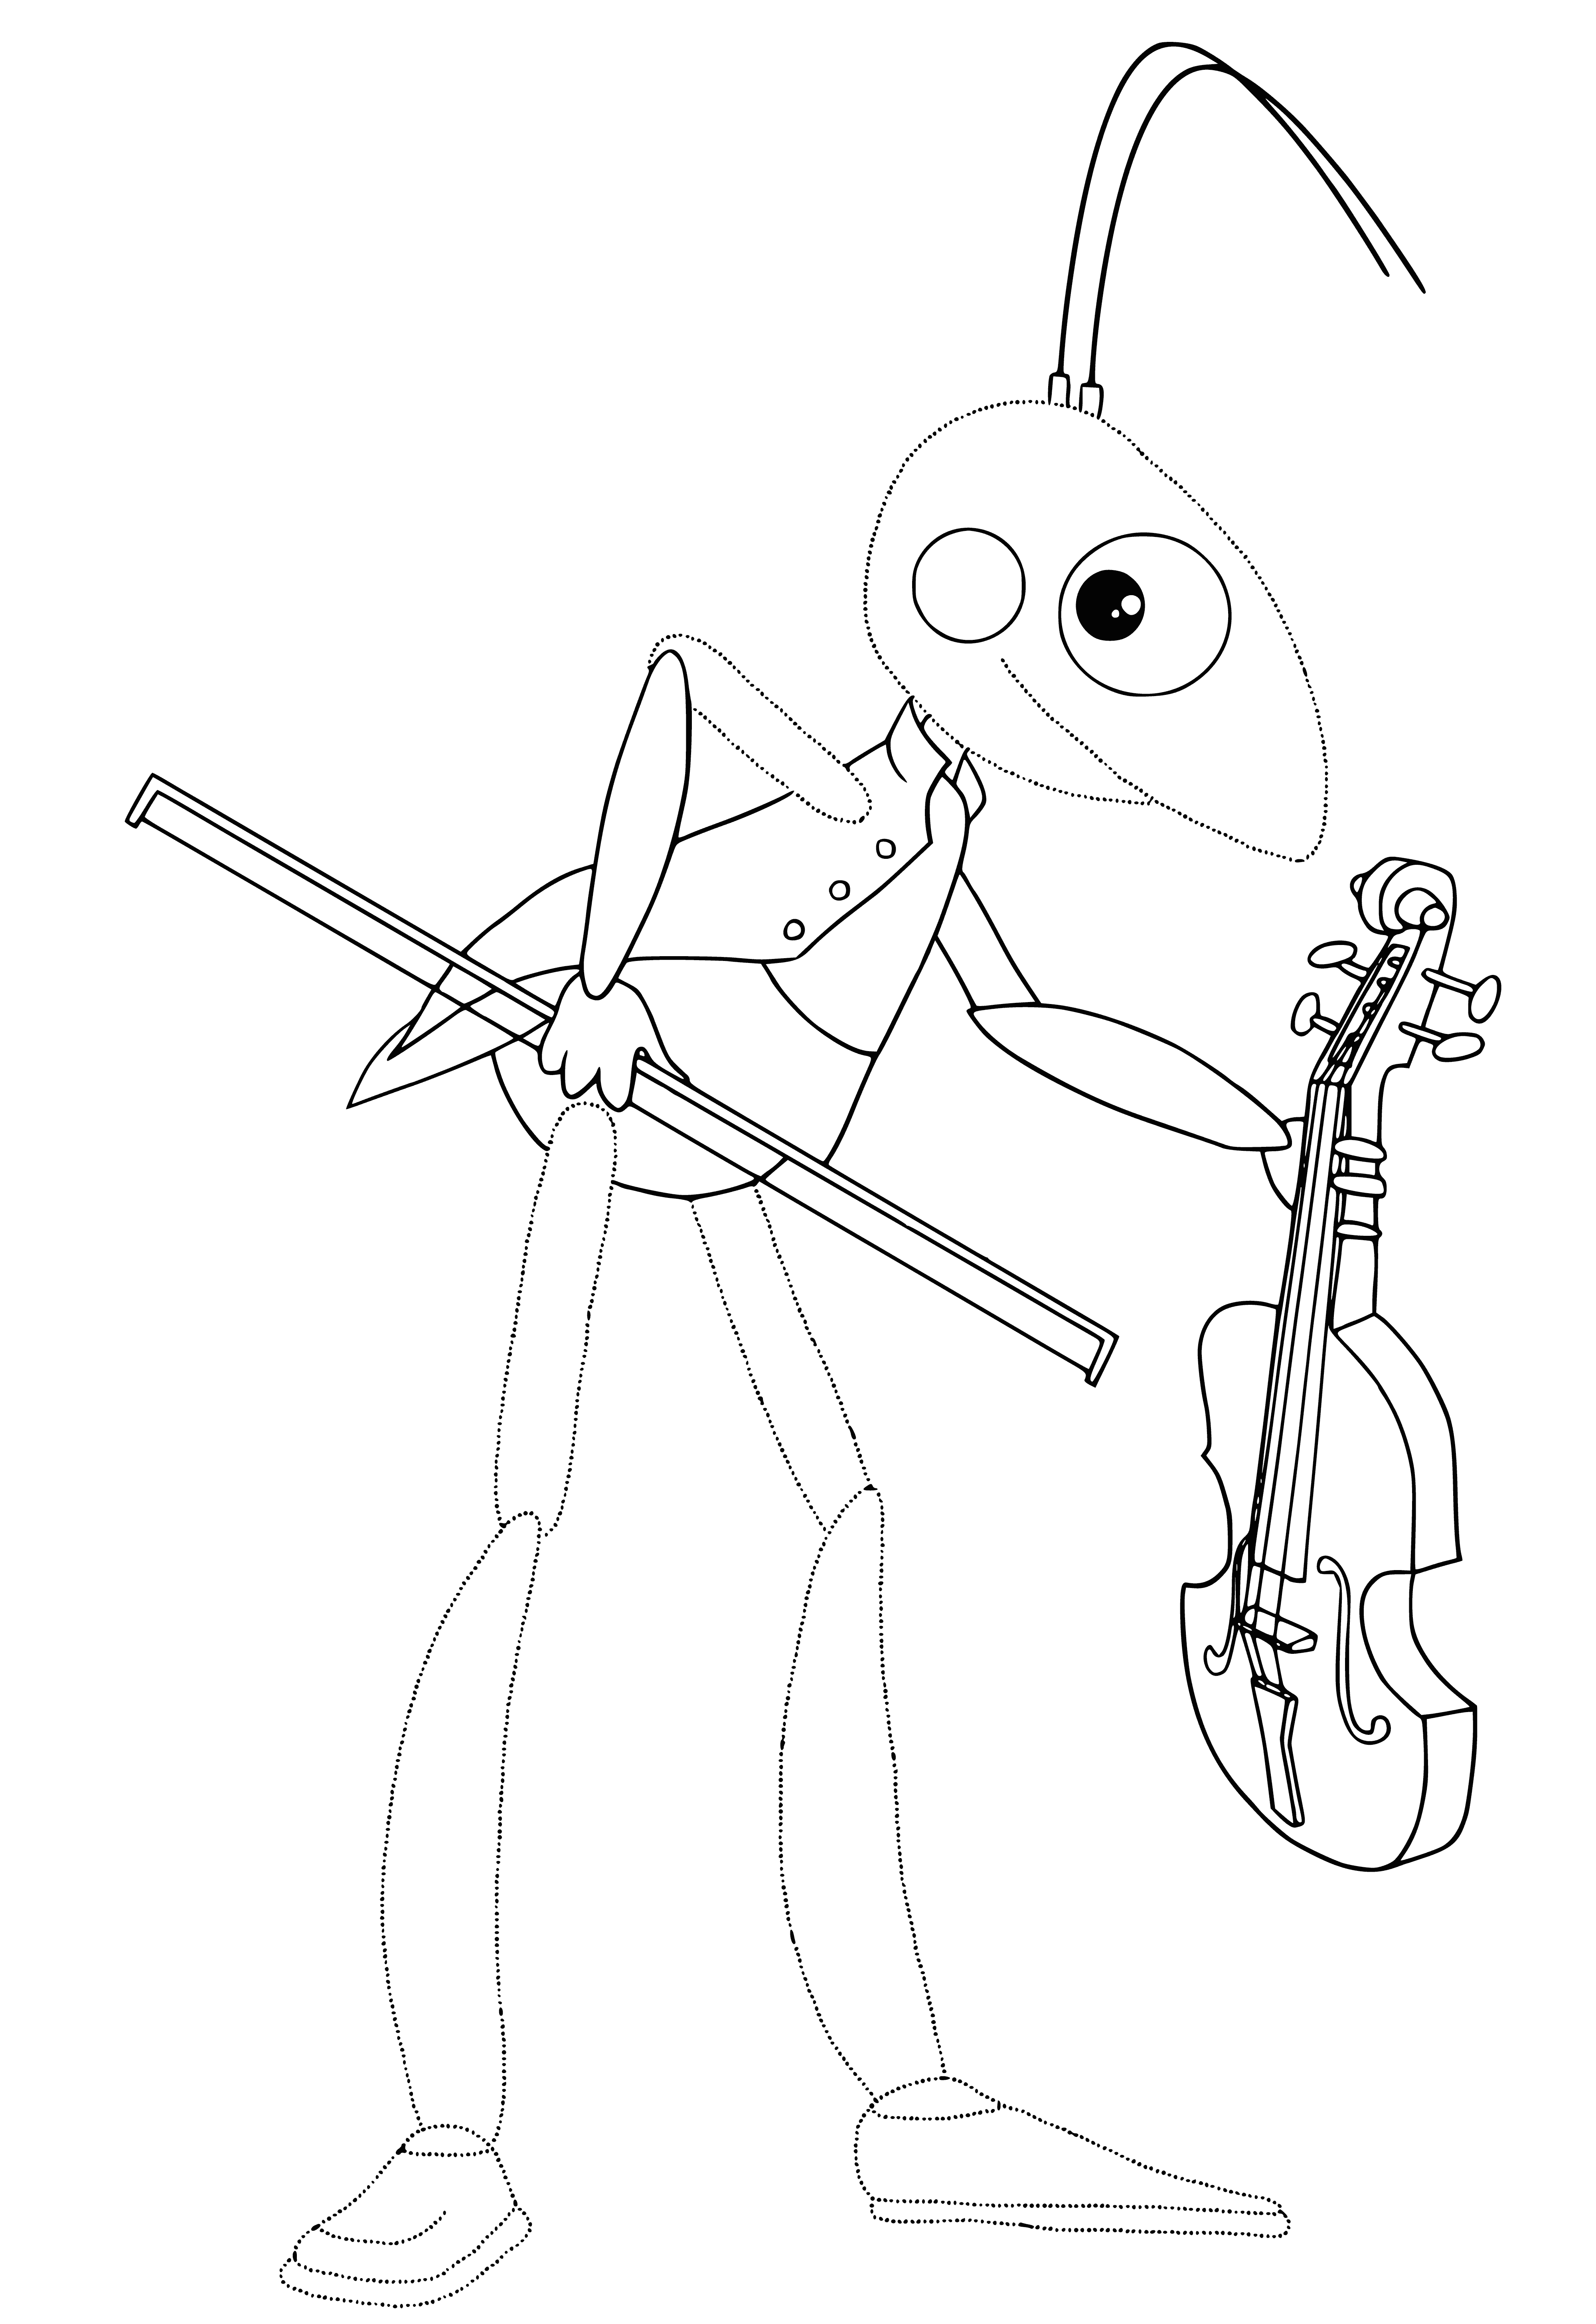 coloring page: Luntik & Kuzya are small, 4-legged creatures wearing colorful clothes & playing instruments.